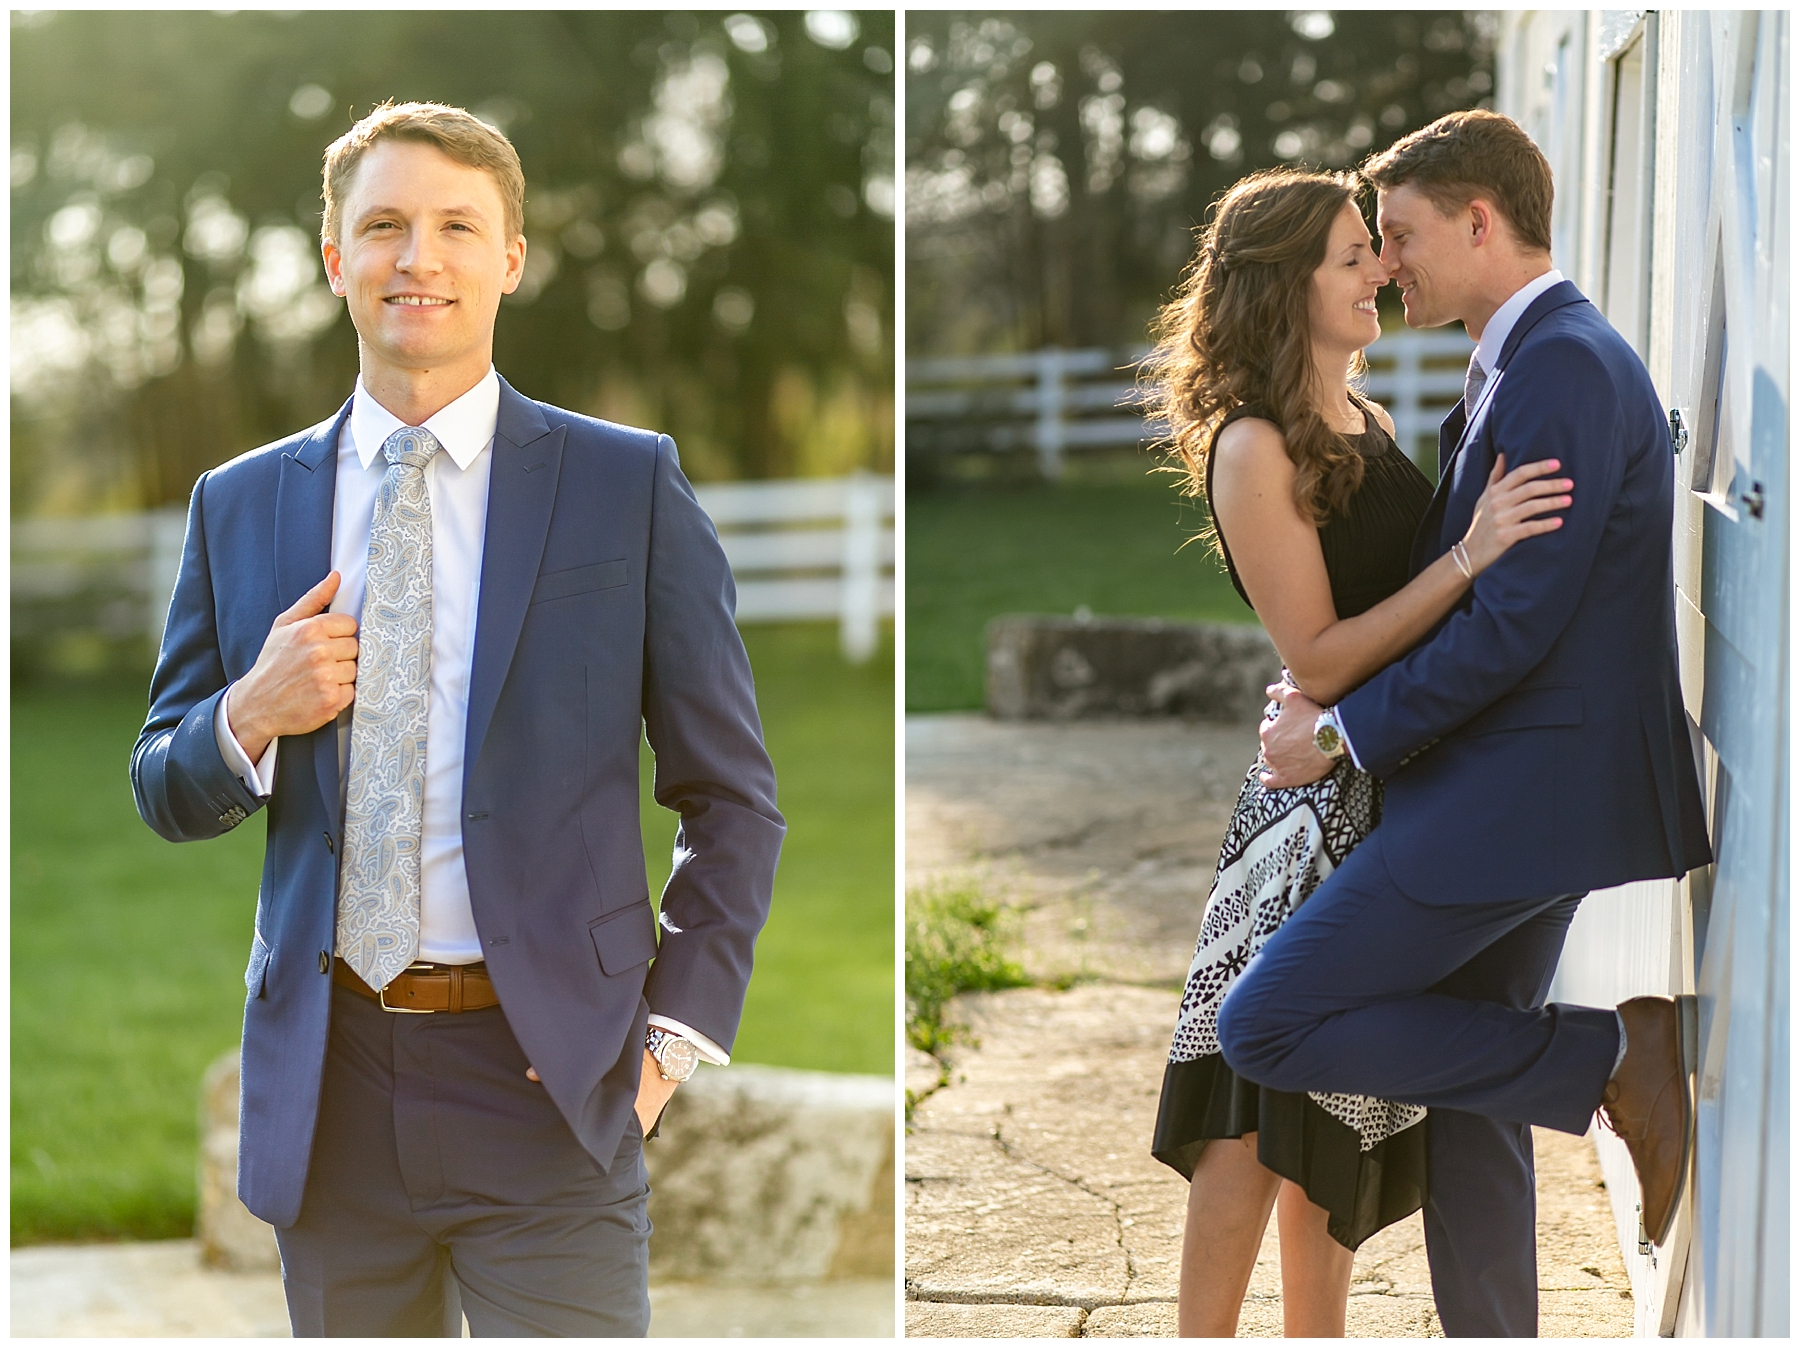 Chelsea Phil Private Estate Engagement Living Radiant Photography photos color_0014.jpg